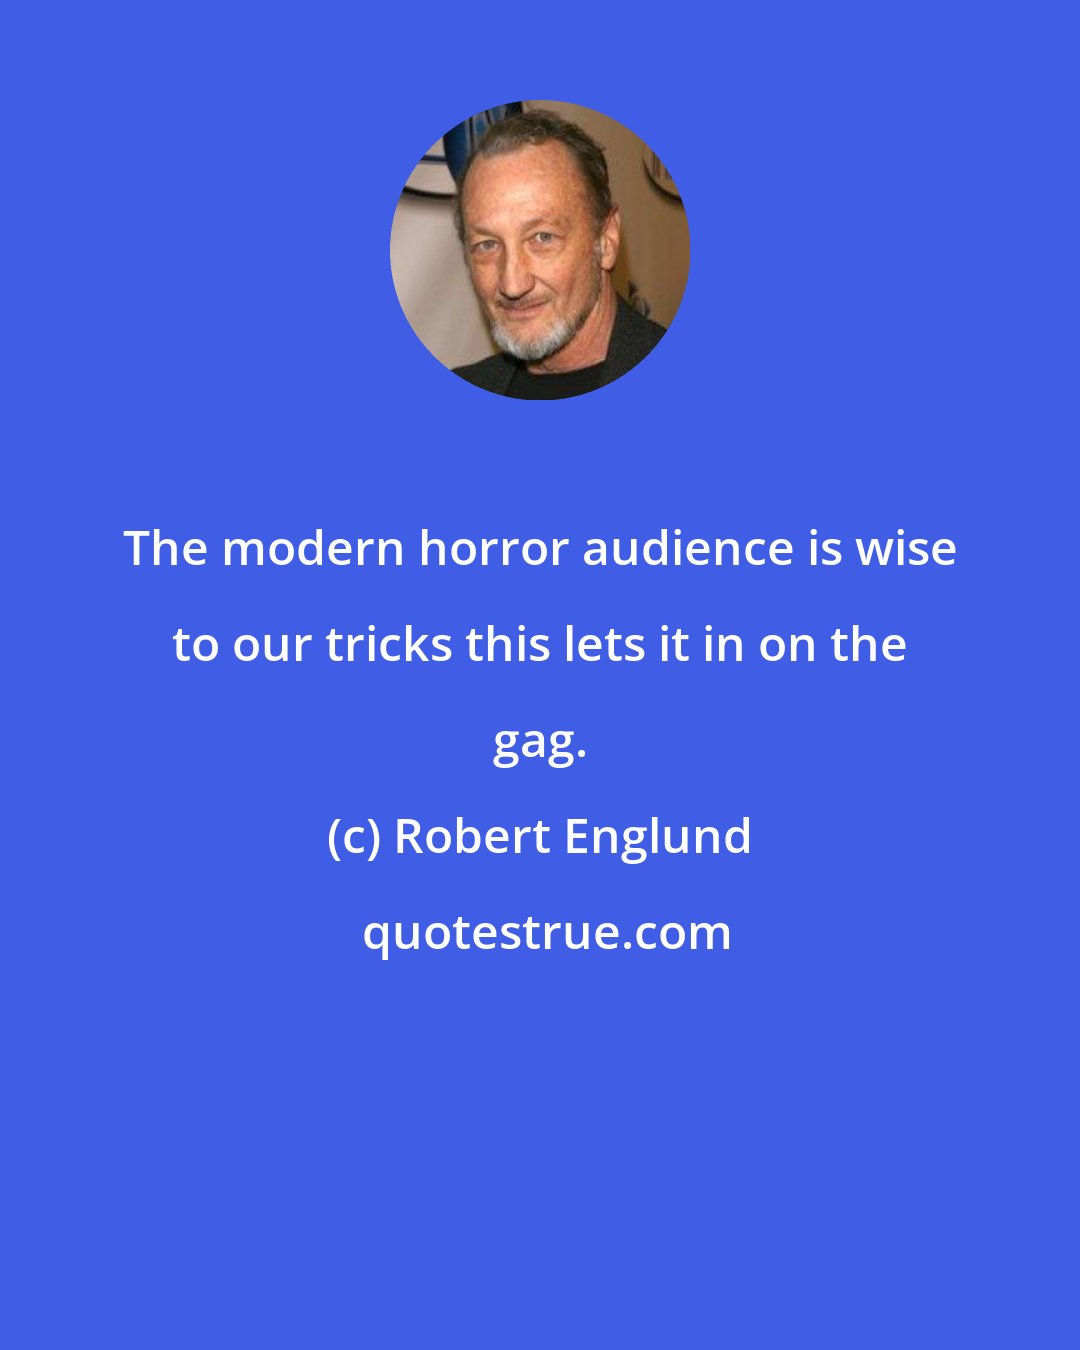 Robert Englund: The modern horror audience is wise to our tricks this lets it in on the gag.